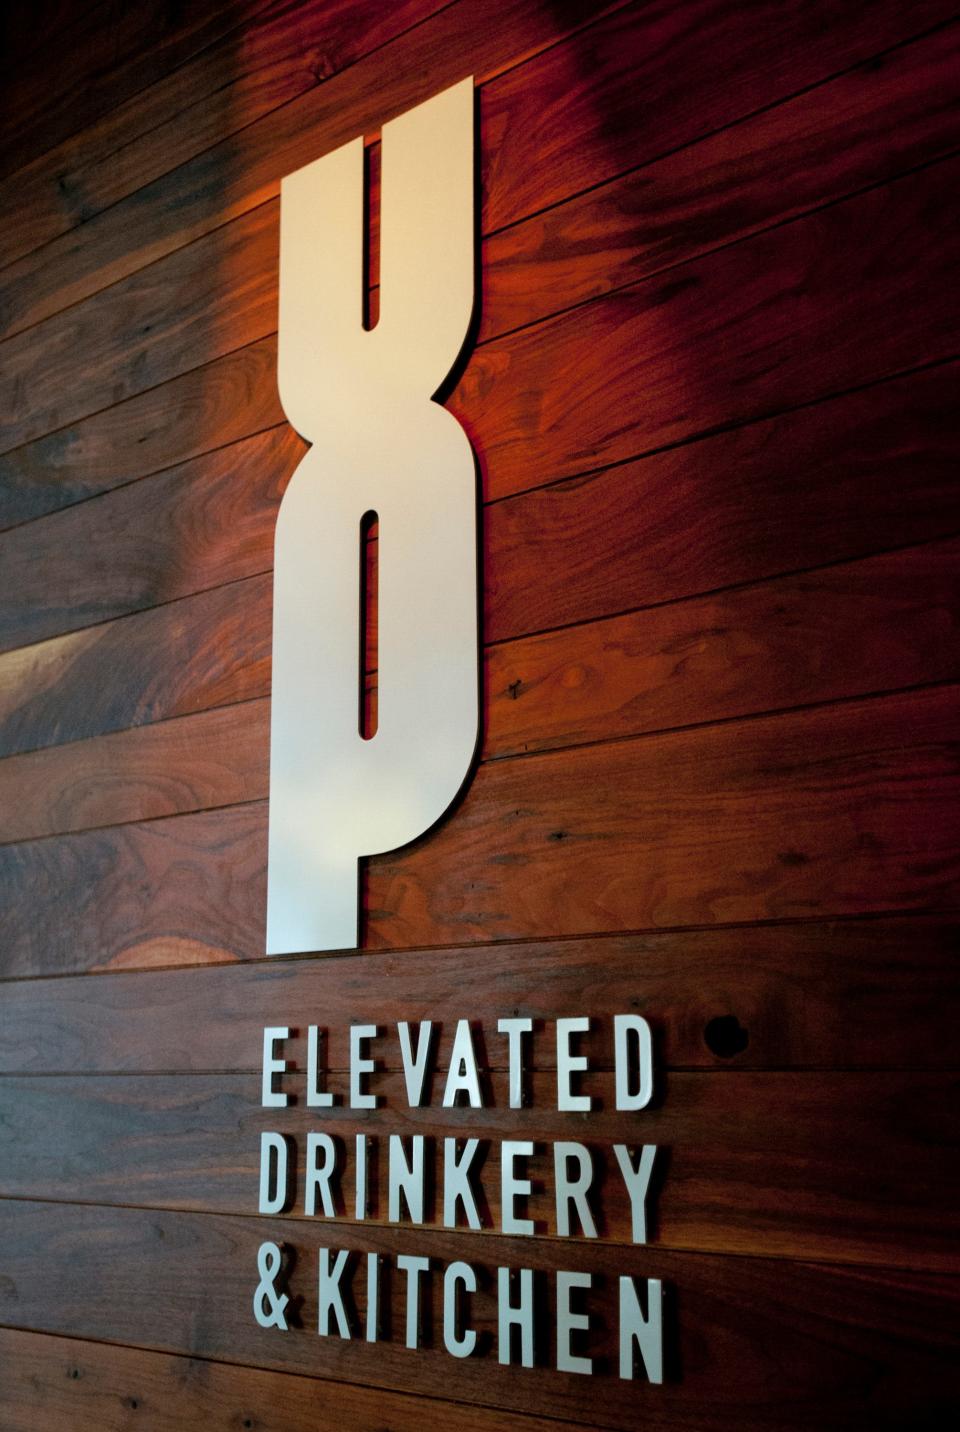 If you take the express elevator to the top of the Hilton Garden Inn Louisville, on W. Chestnut, you'll enter the 8Up Elevated Drinkery & Kitchen.October 25, 2018